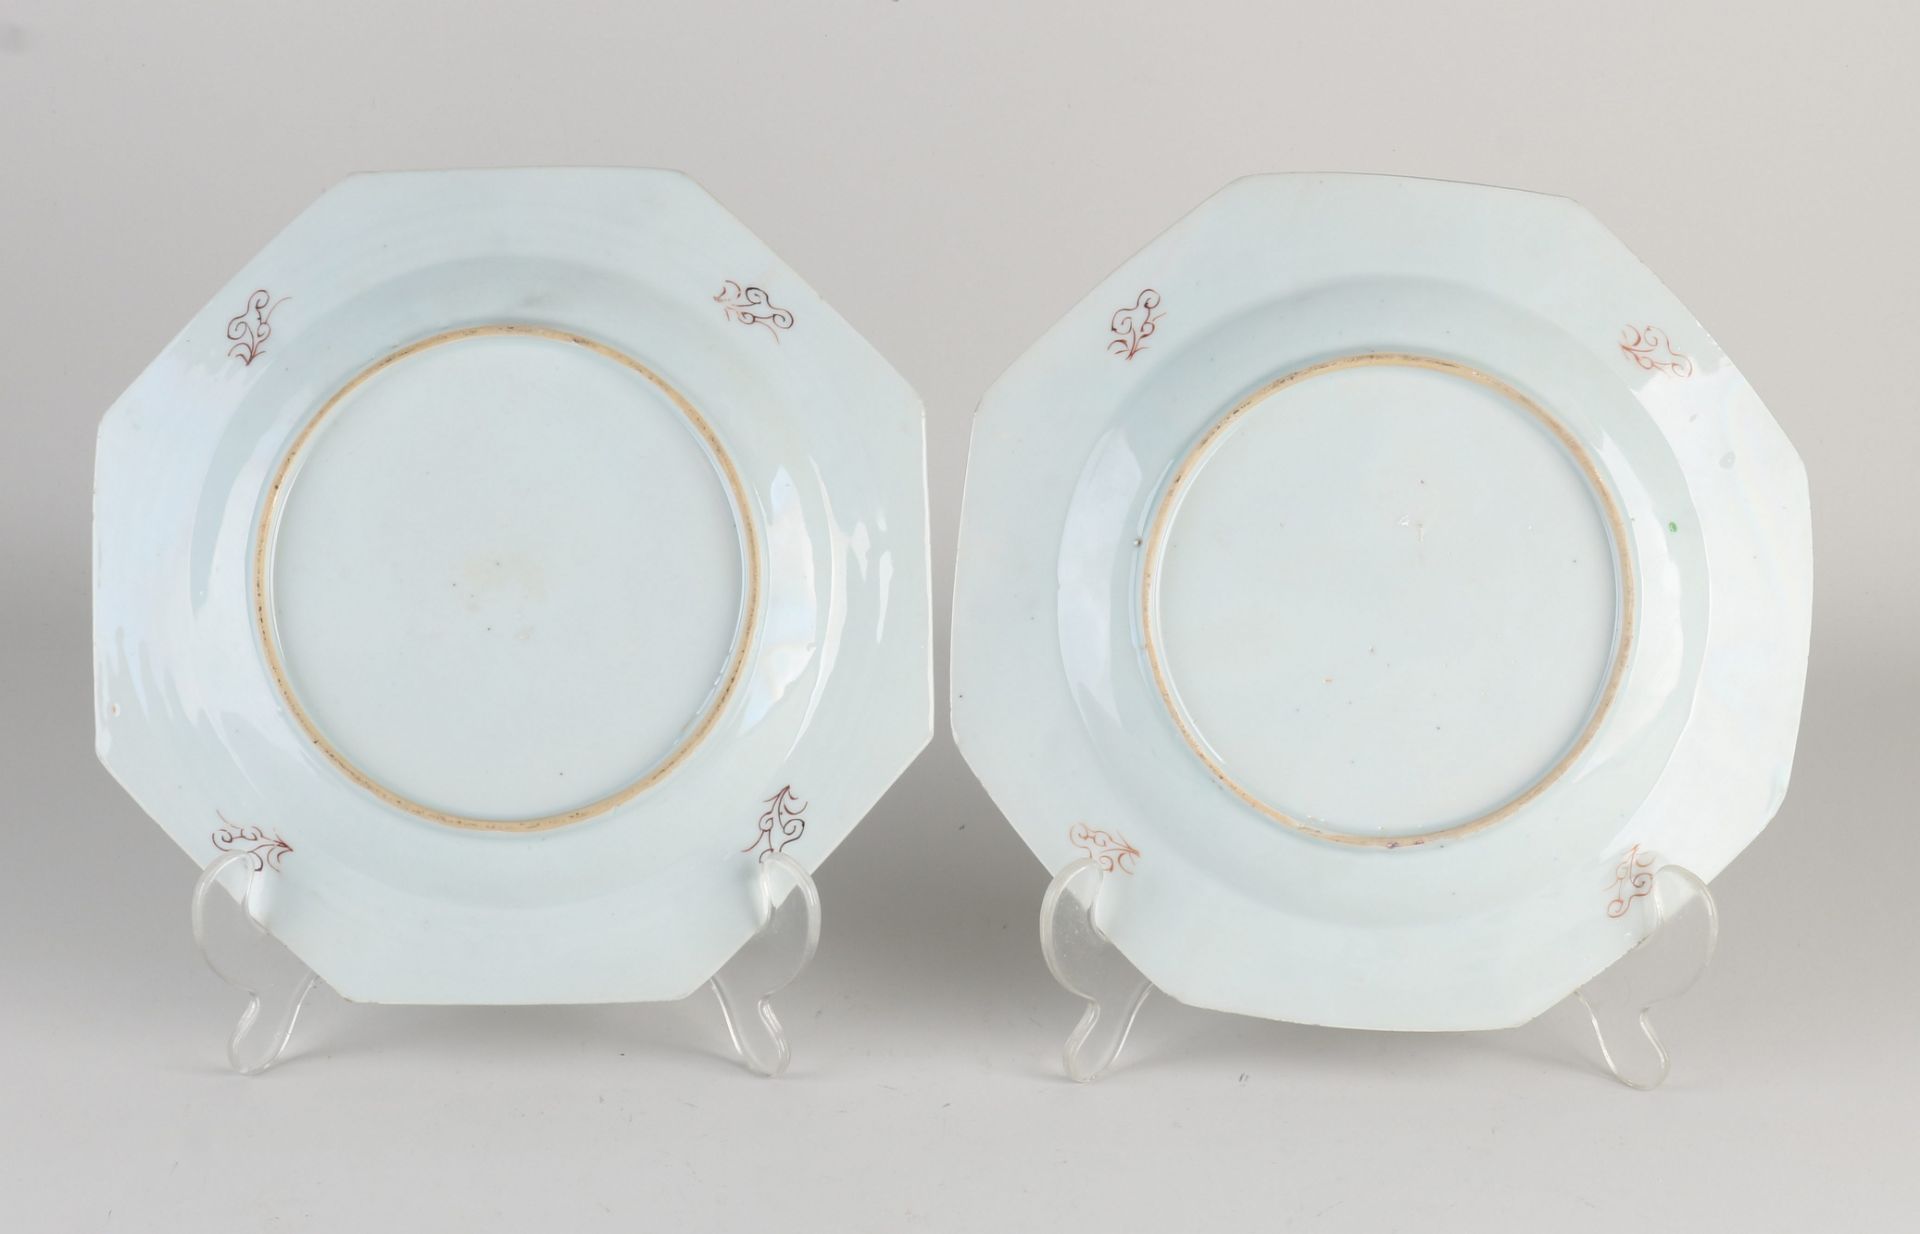 Two 18th century Chinese Family Rose dishes, Ø 21.3 - 21.5 cm. - Image 2 of 2